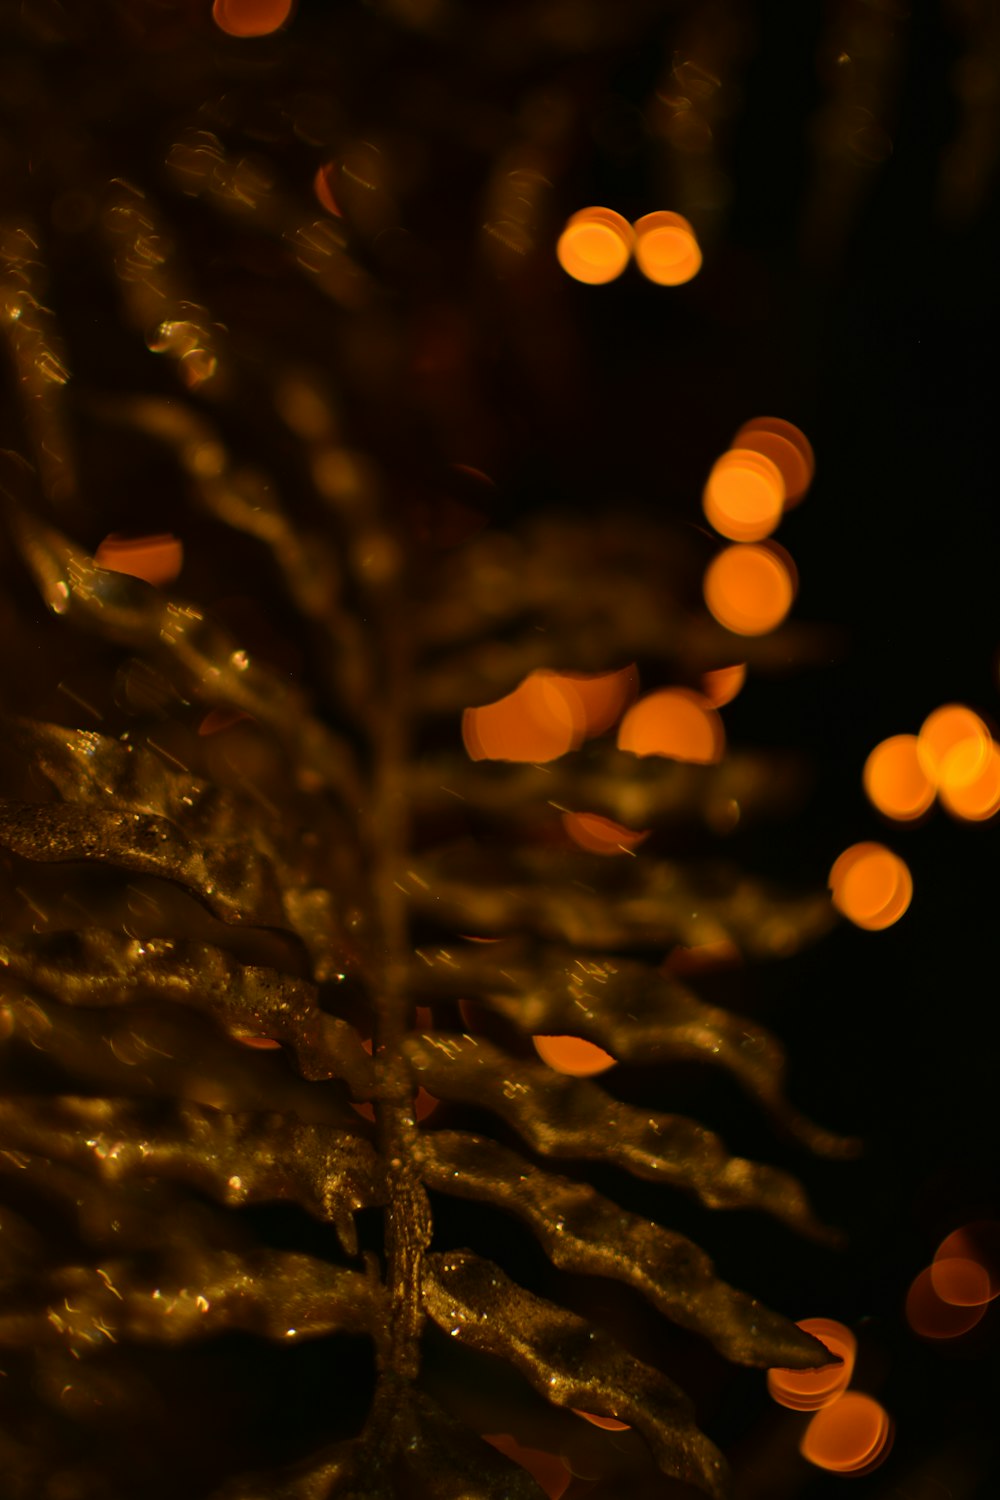 a close up of a tree with lights in the background